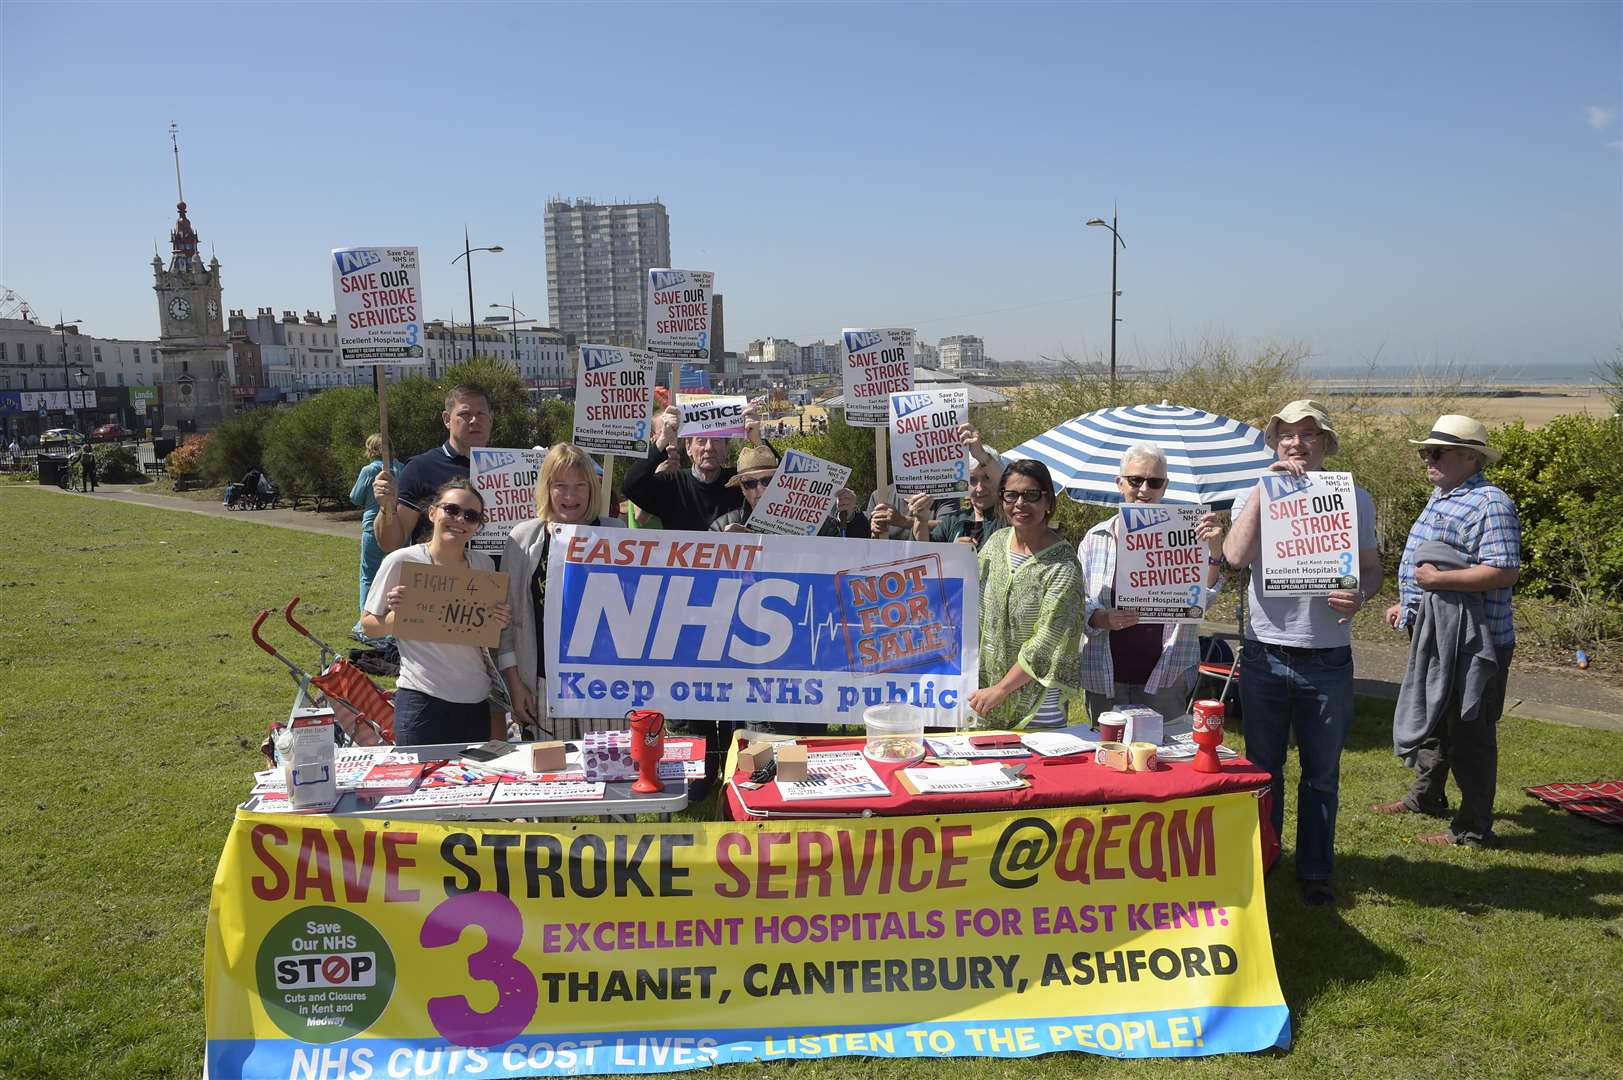 The NHS crisis has sparked protests across Kent in recent years including one at Marine Gardens in Margate last May